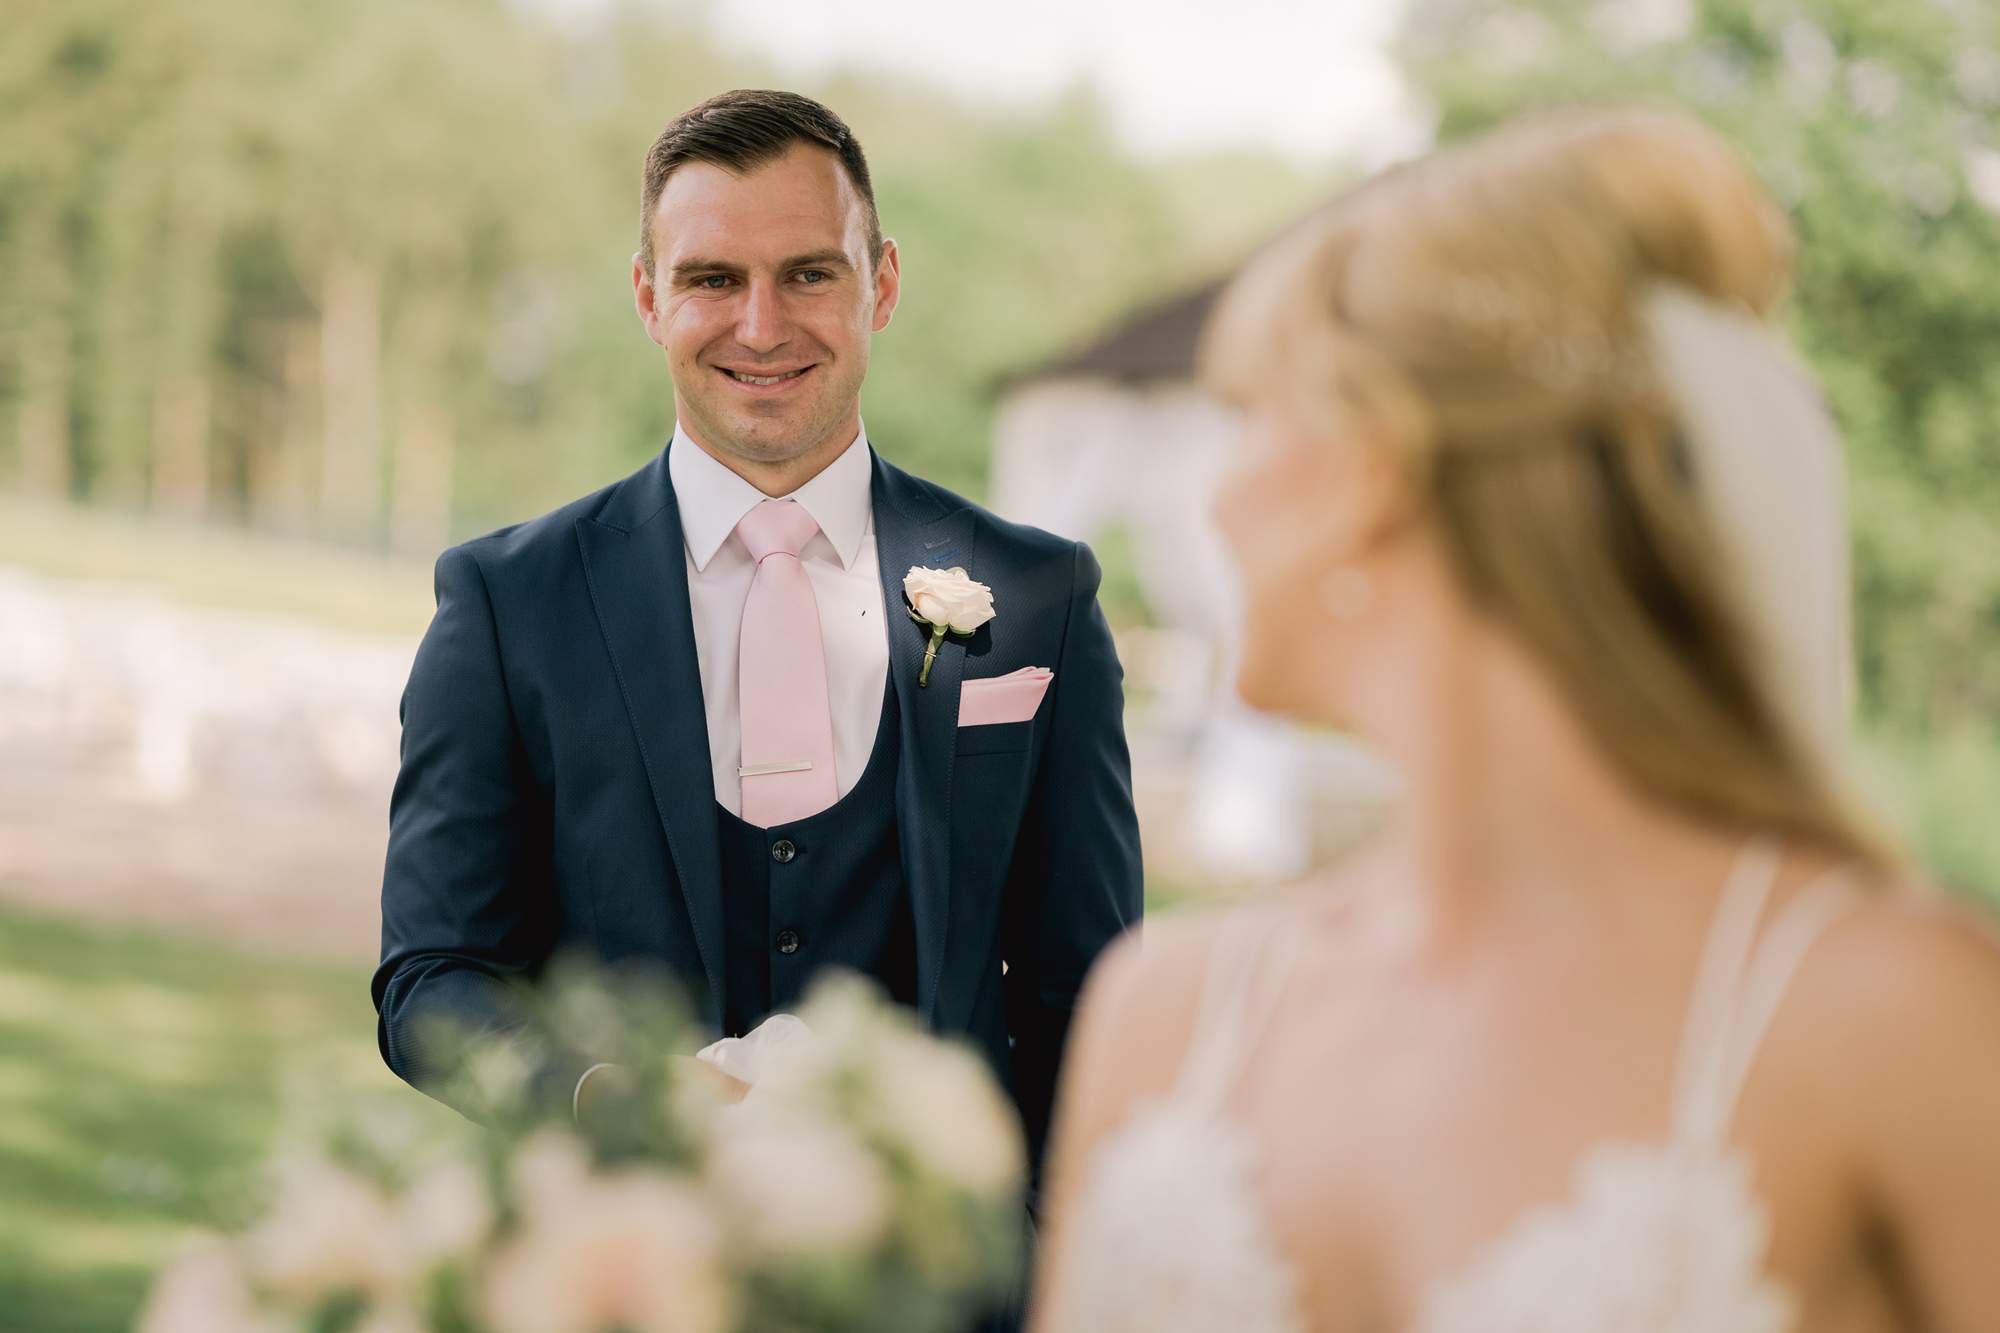 A groom smiles at his wife on their wedding day.